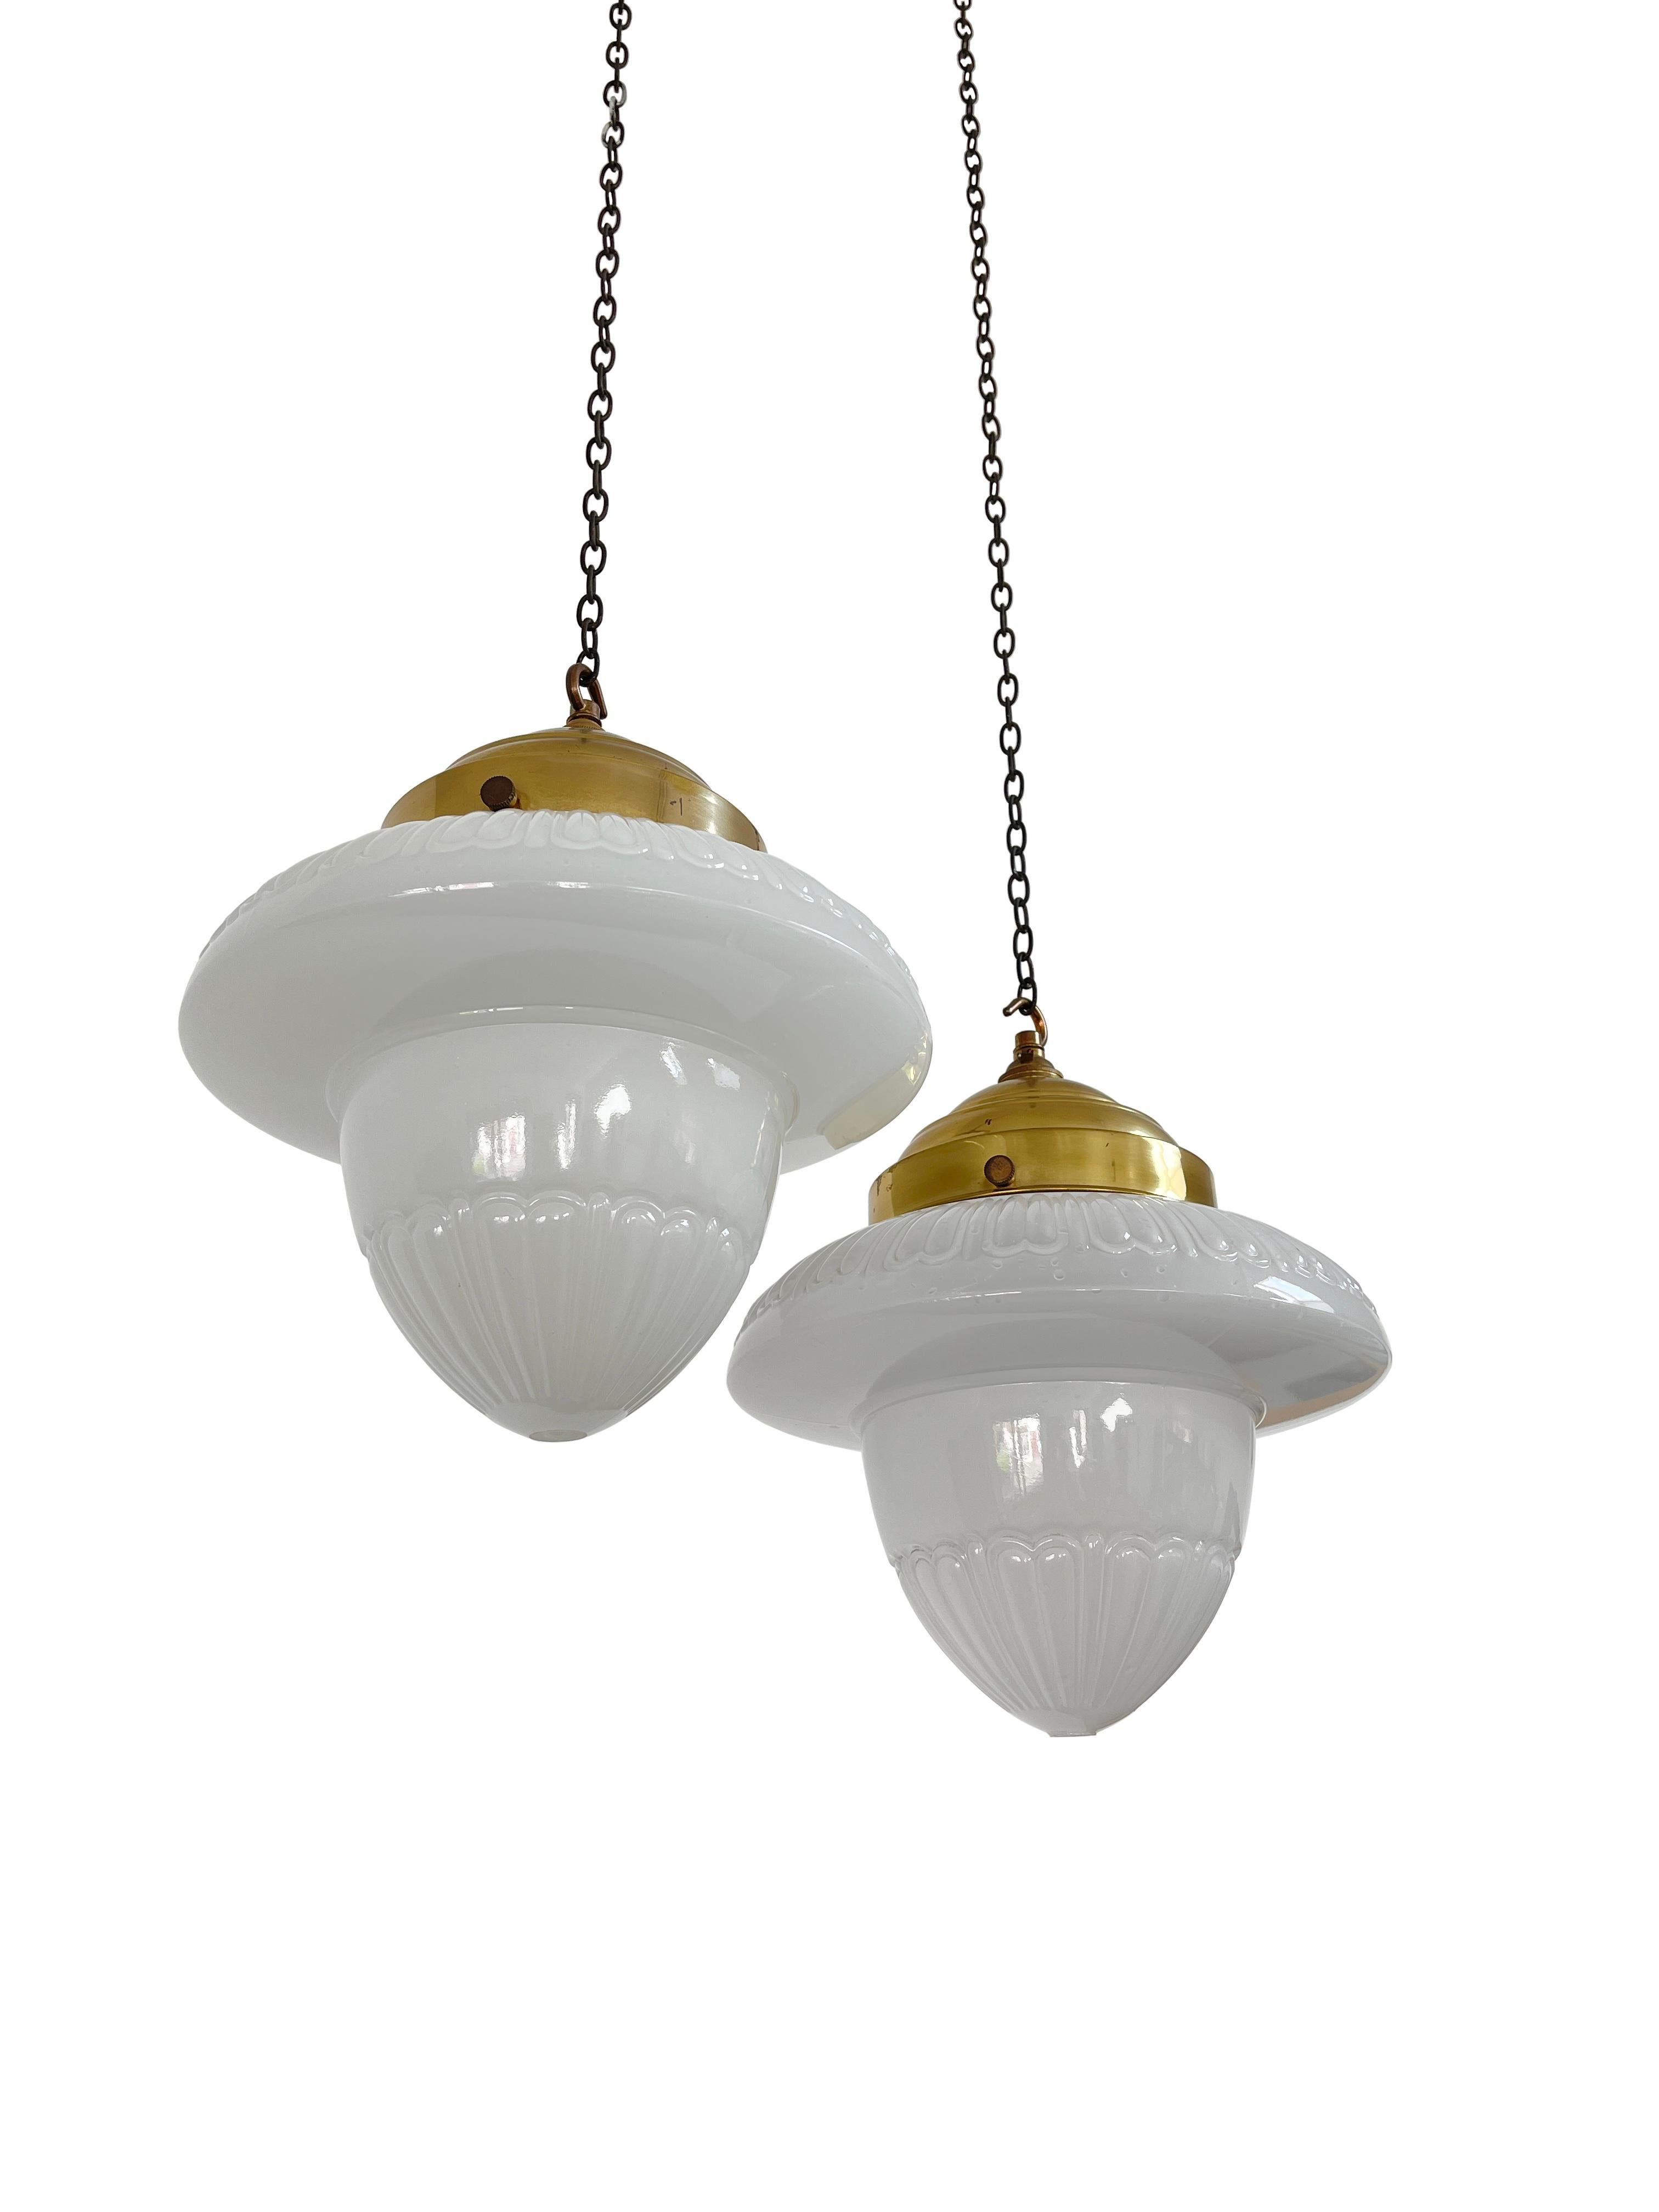 - A wonderful pair of acorn opaline pendant lights, English, Early Twentieth Century.
- Heavy quality glass shades with intricate detail and pattern, small open holes to the underneath, large round hooked brass galleries.
- Wear commensurate with